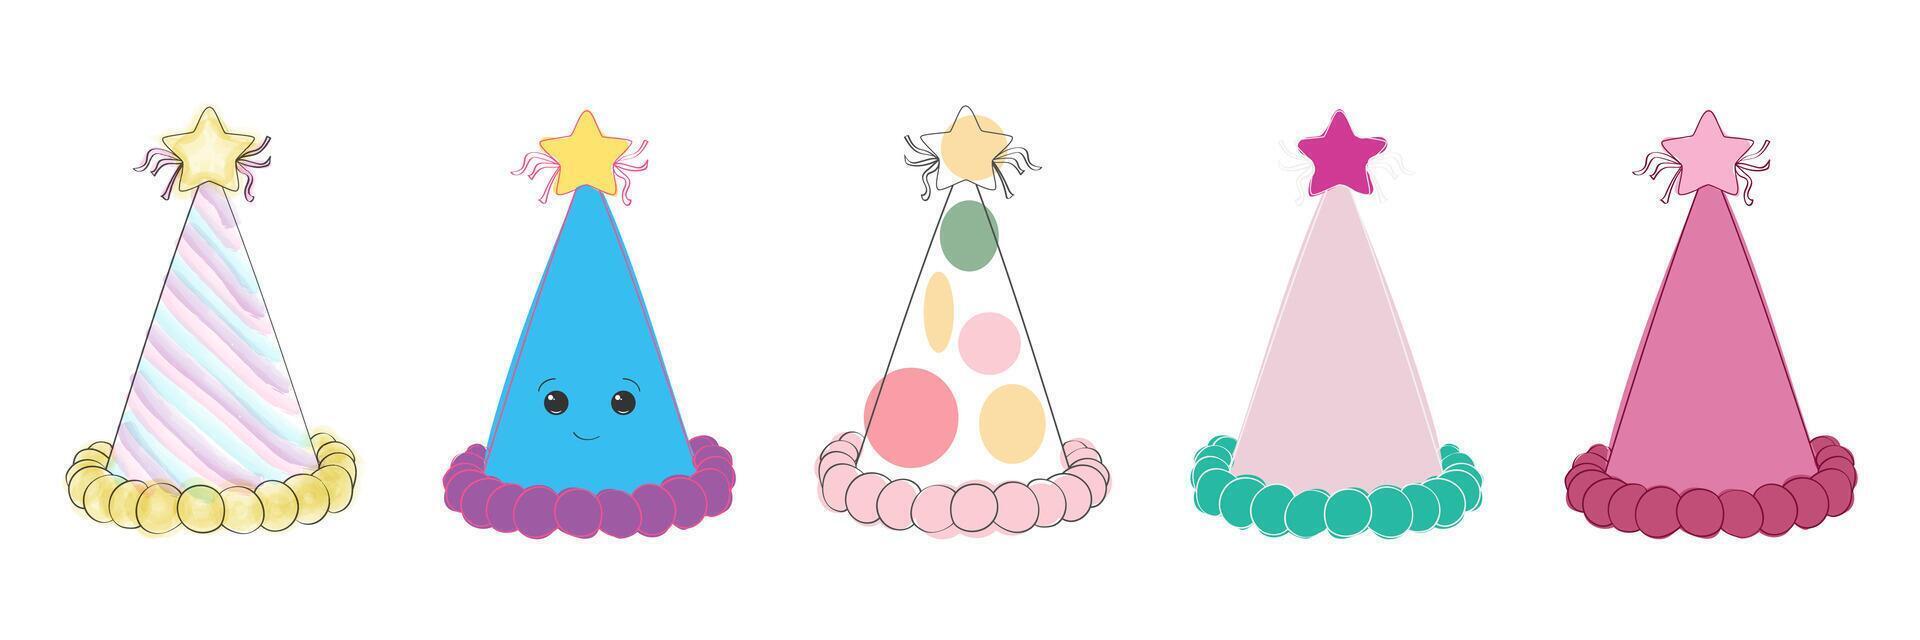 A row of colorful party hats adorned with stars lined up neatly in a festive display. Each hat is vibrant and ready for celebration vector